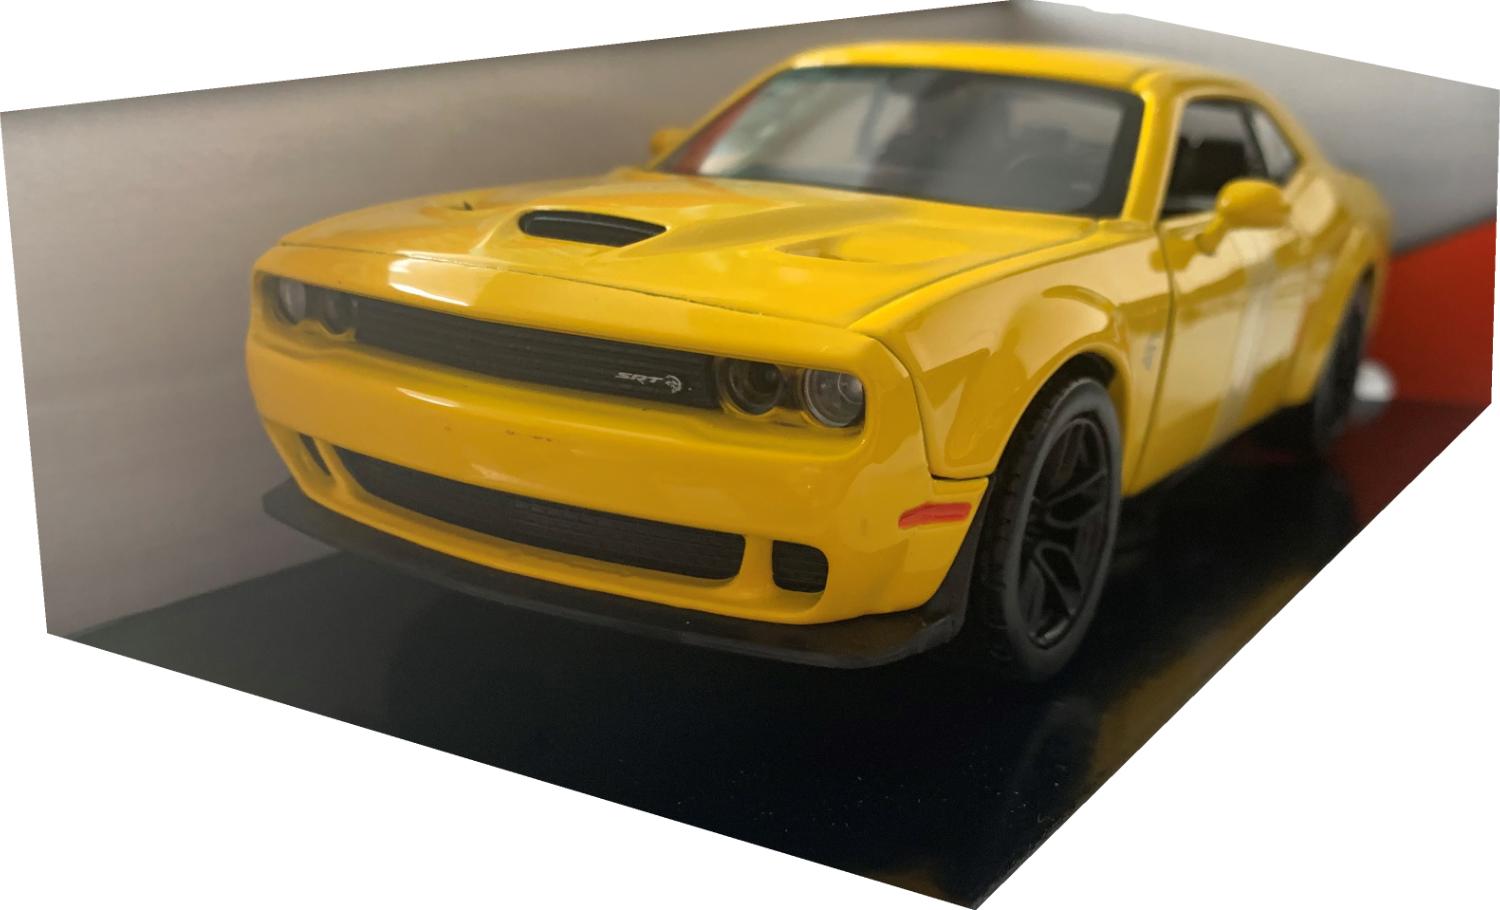 An excellent scale model of a Dodge Challenger SRT Hellcat Widebody decorated in yellow with rear spoiler and black wheels.